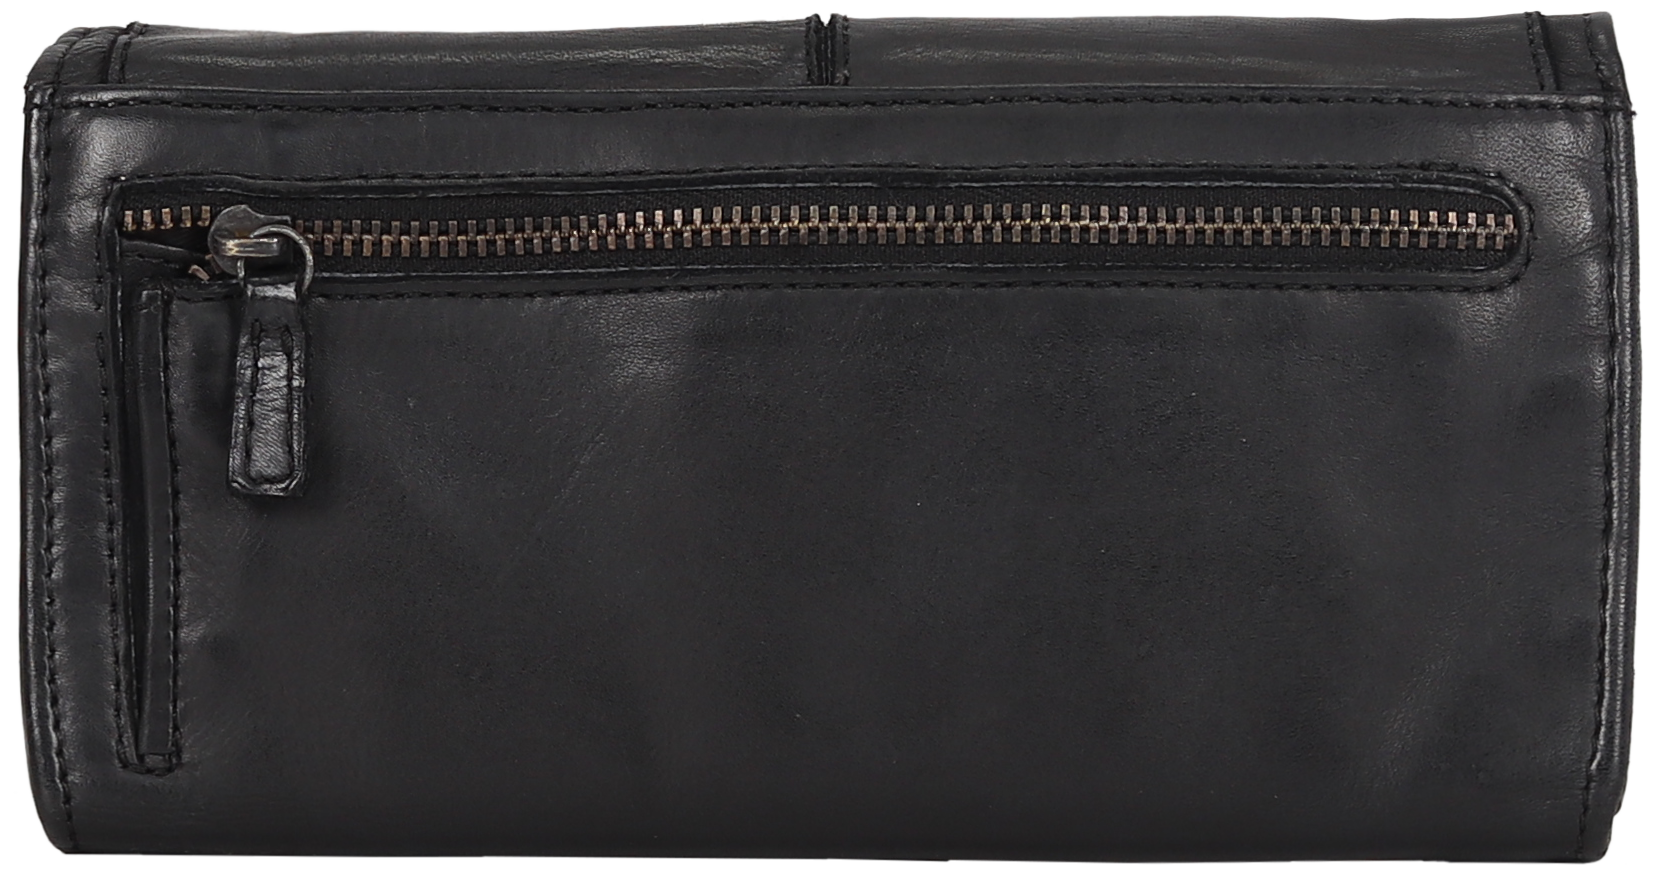 Women's Leather Studded Purse